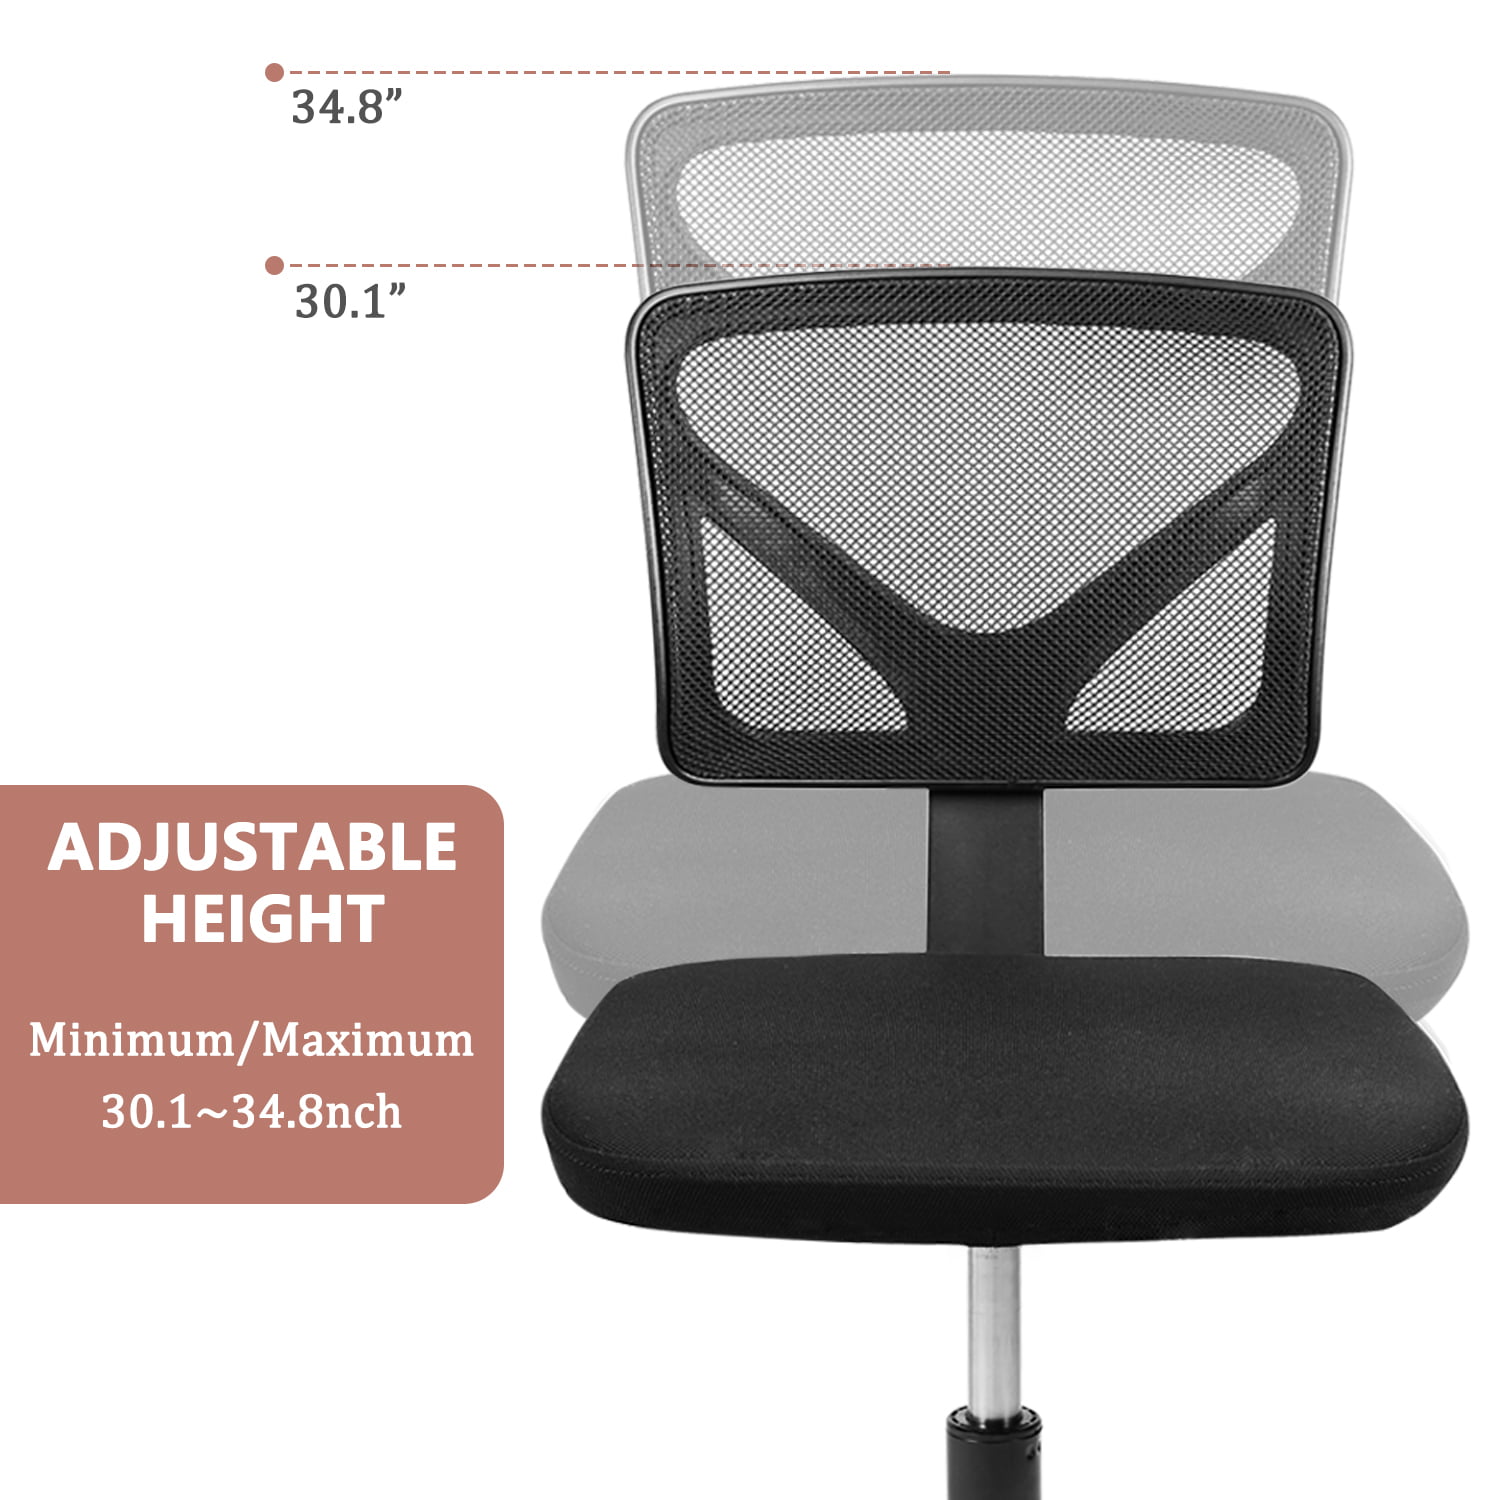 Low Mid PP Mesh Back Fabric Seat Armless Ergonomic Task Chair Hight Adjustable HouseInBox Task Chair Office Computer Chair 